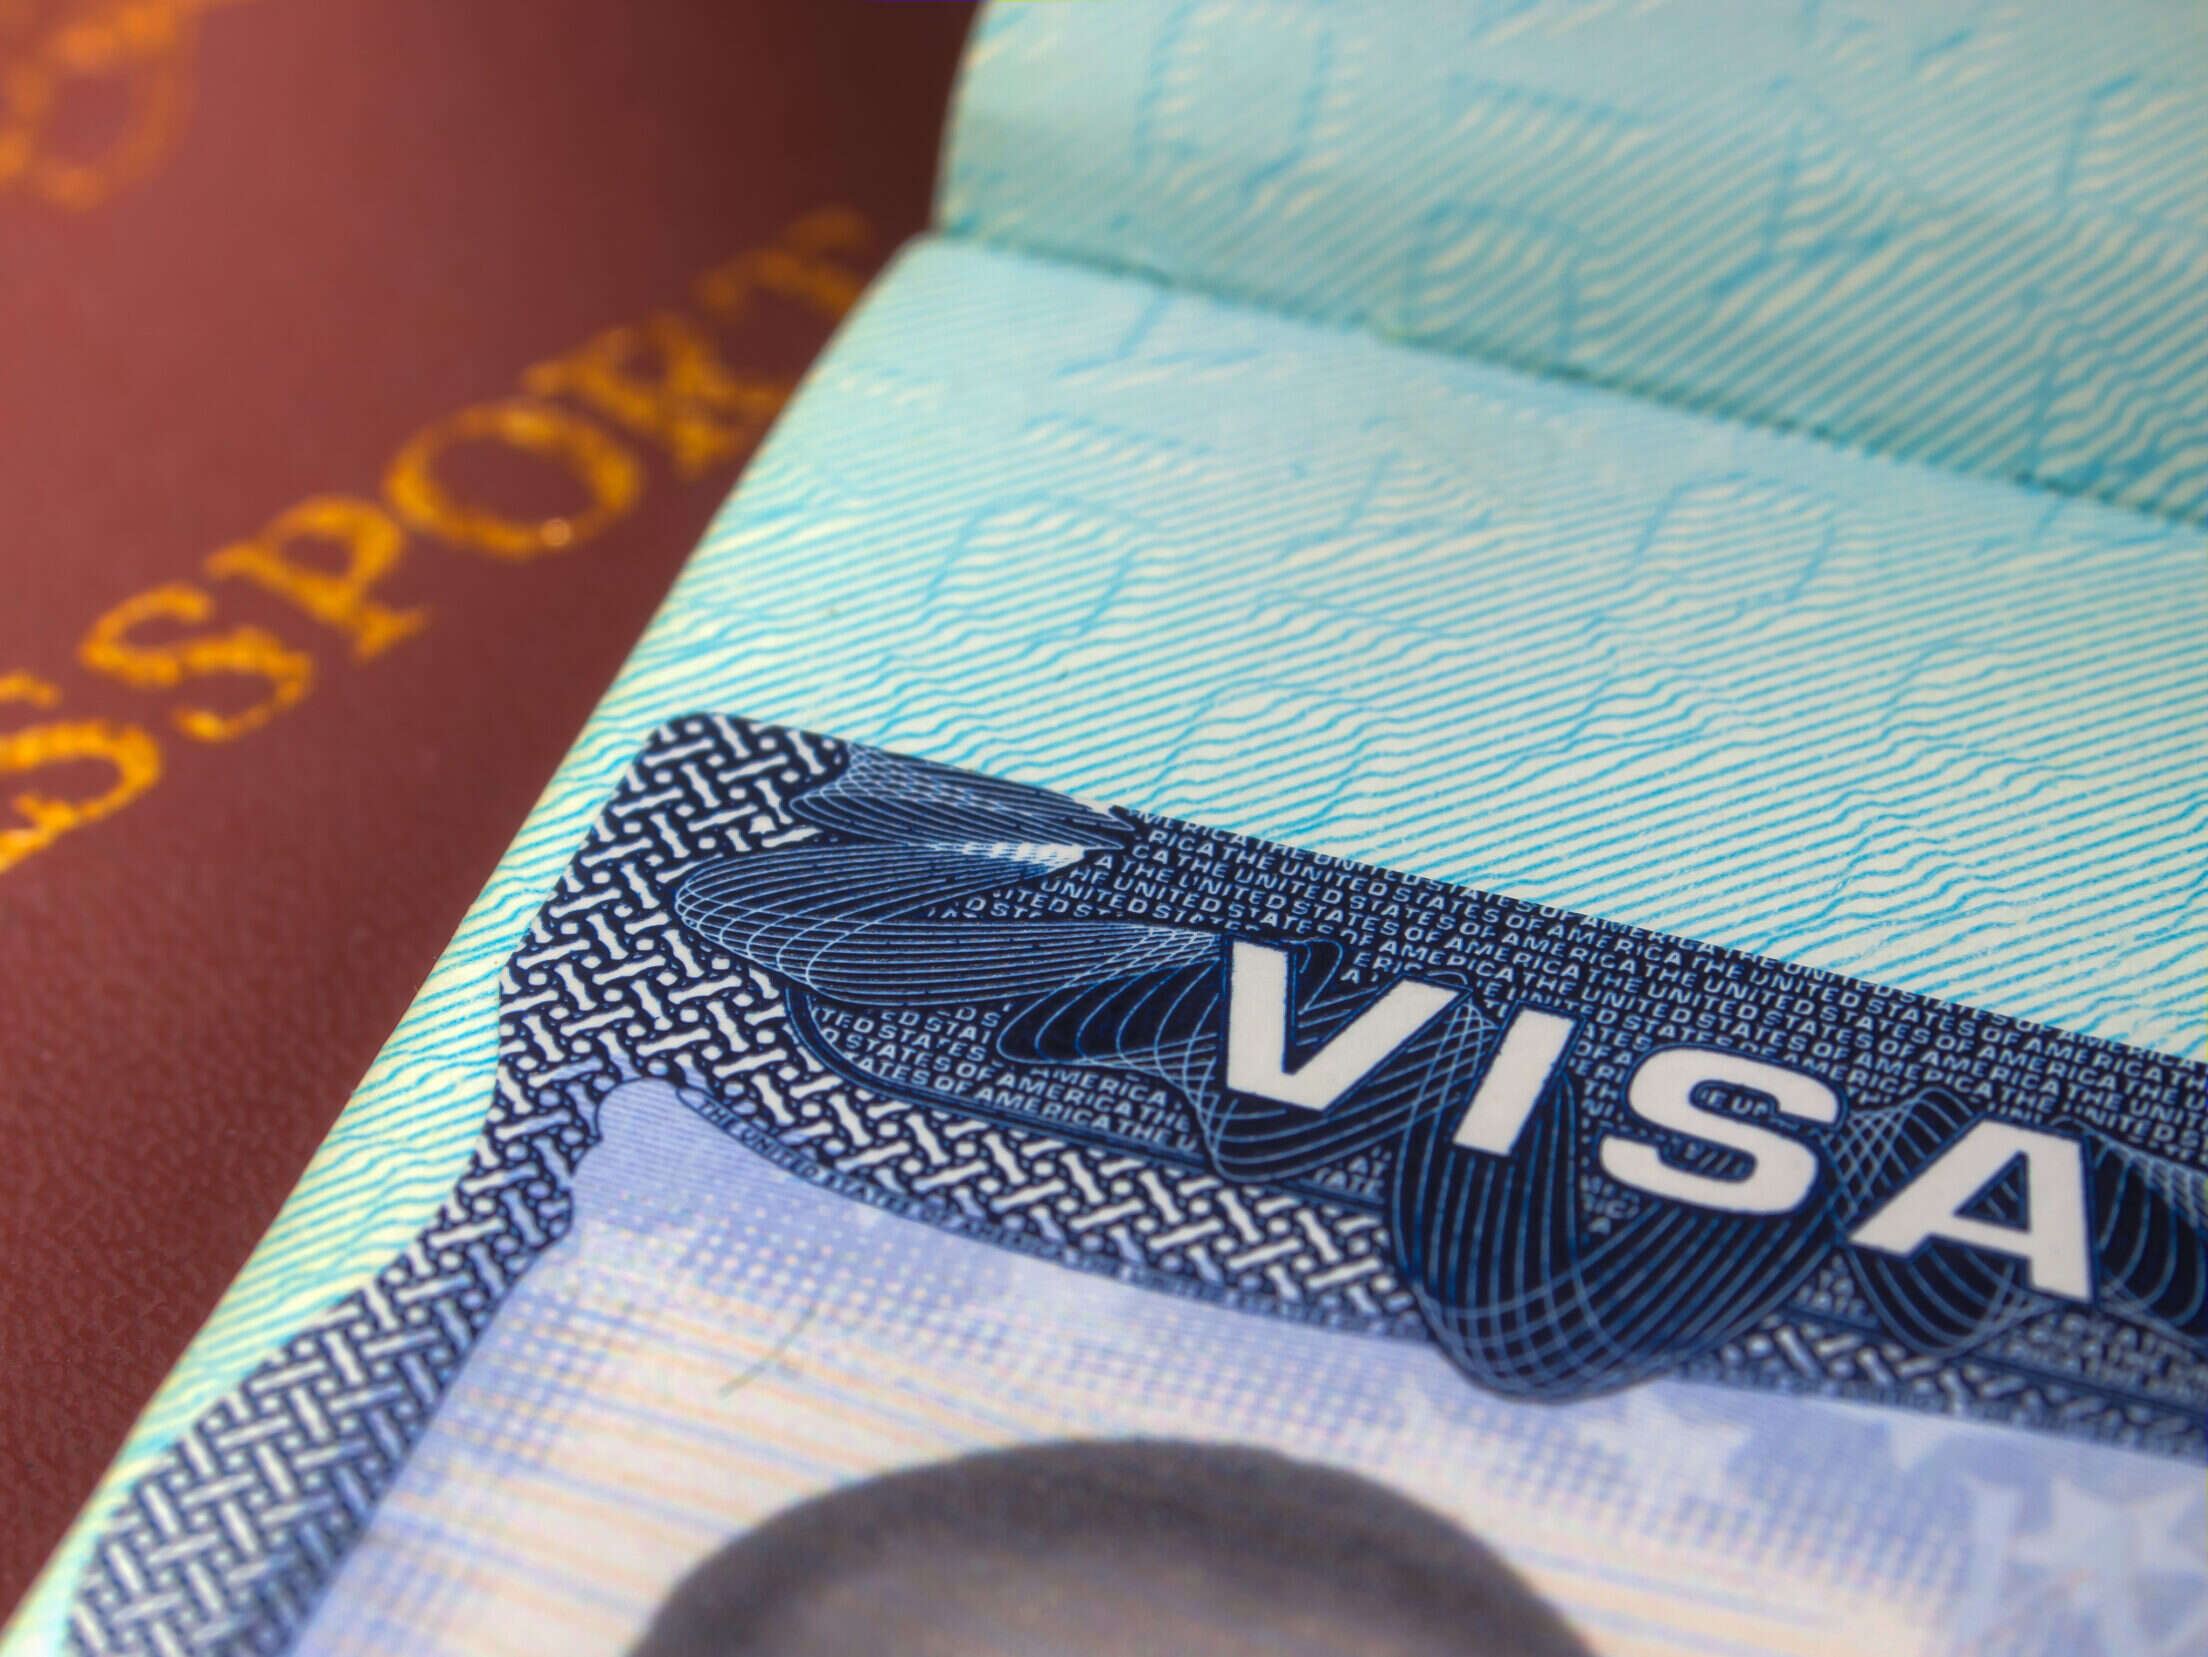 New 'hostile' visa rules for journalists propose 240-day time limit on working in the USA